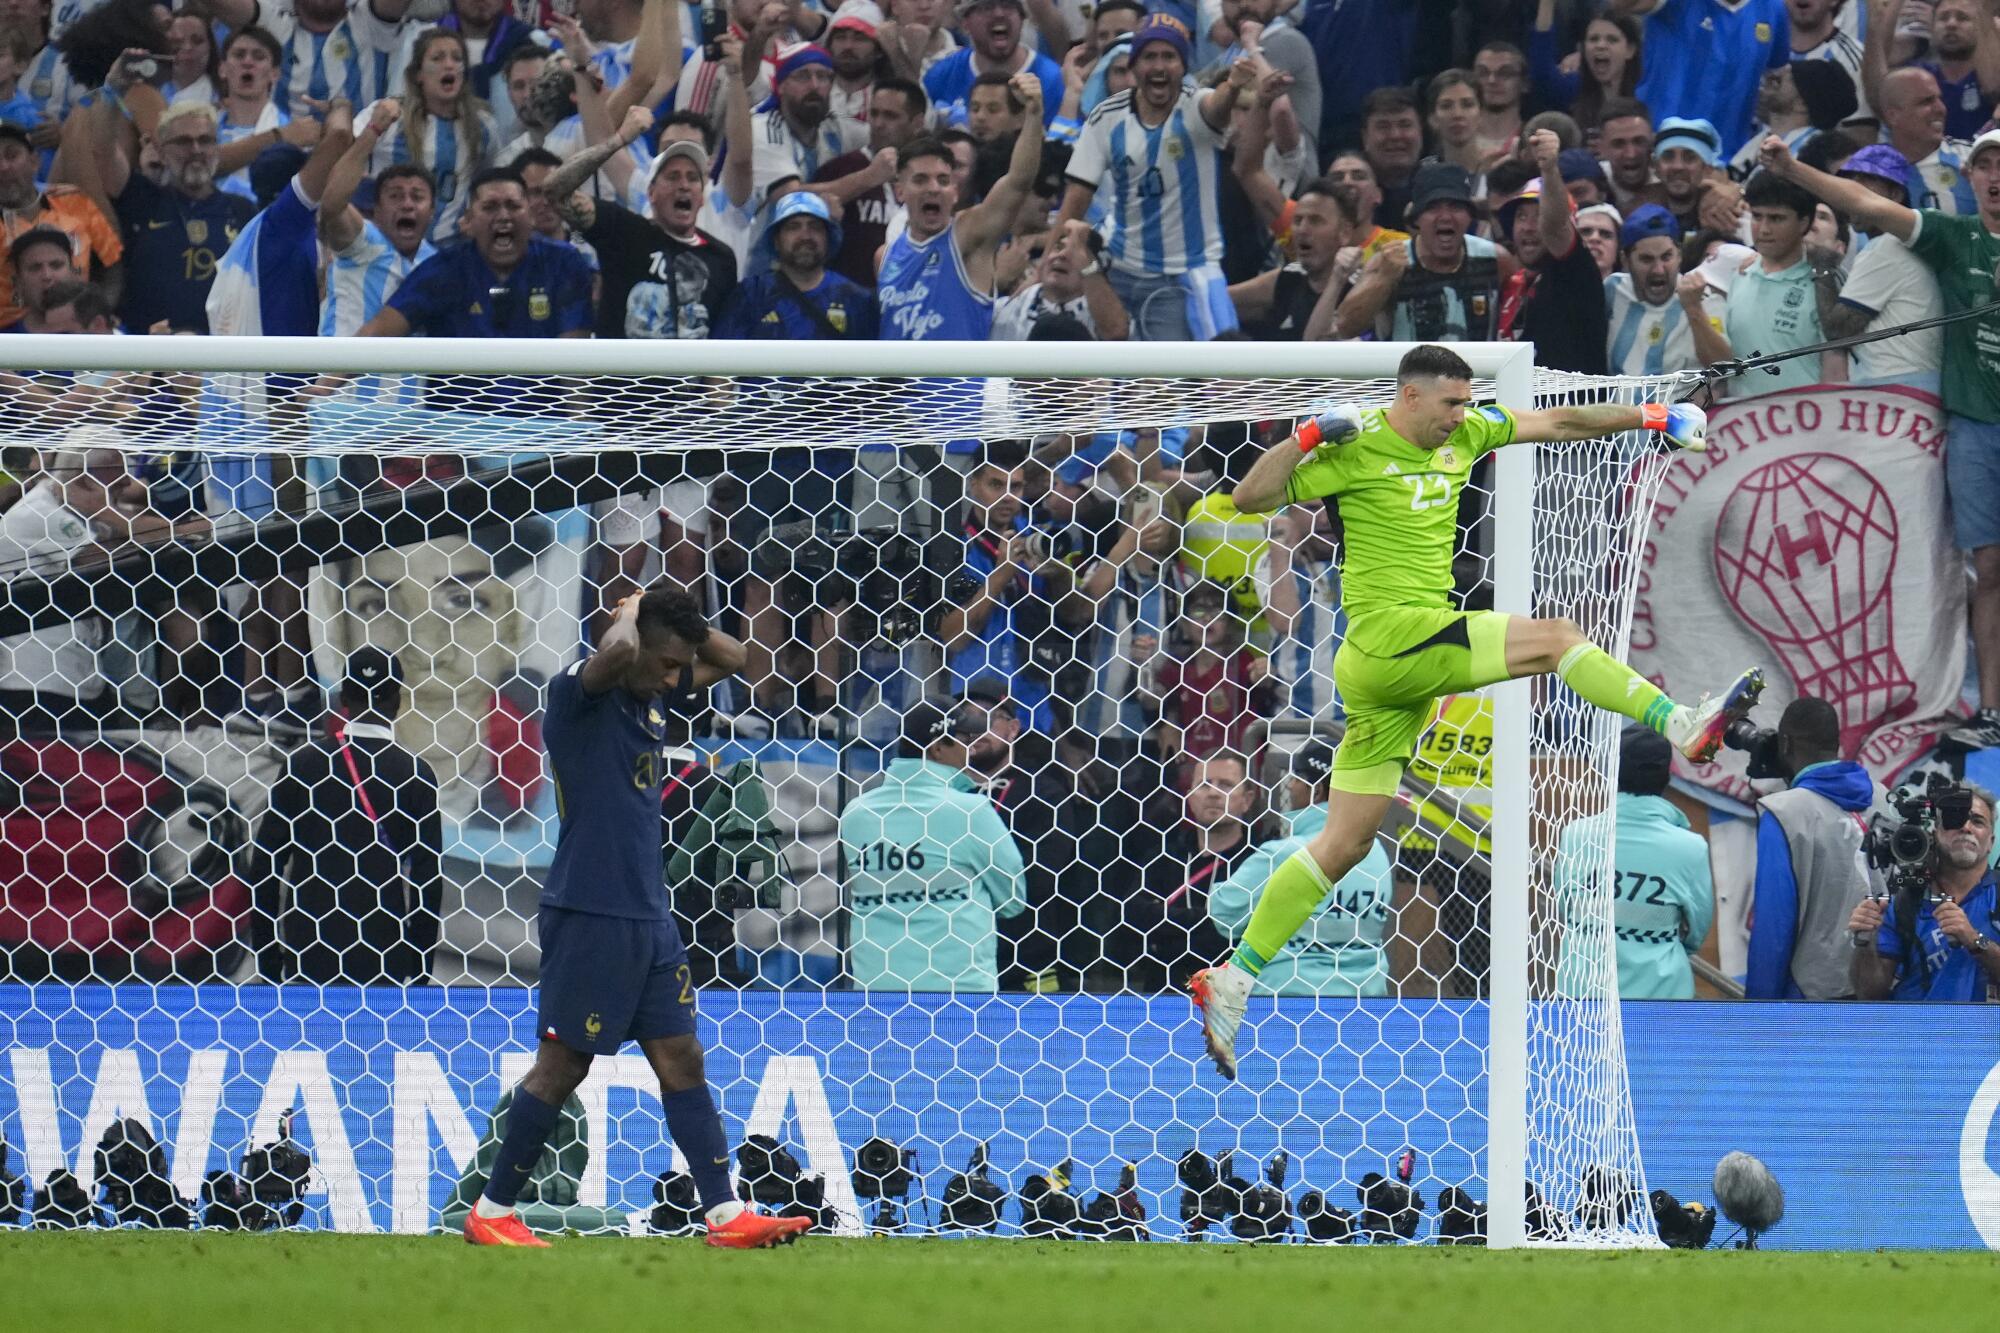 Argentina's goalkeeper Emiliano Martinez celebrates blocking a shot from France's Kingsley Coman in a penalty shootout.